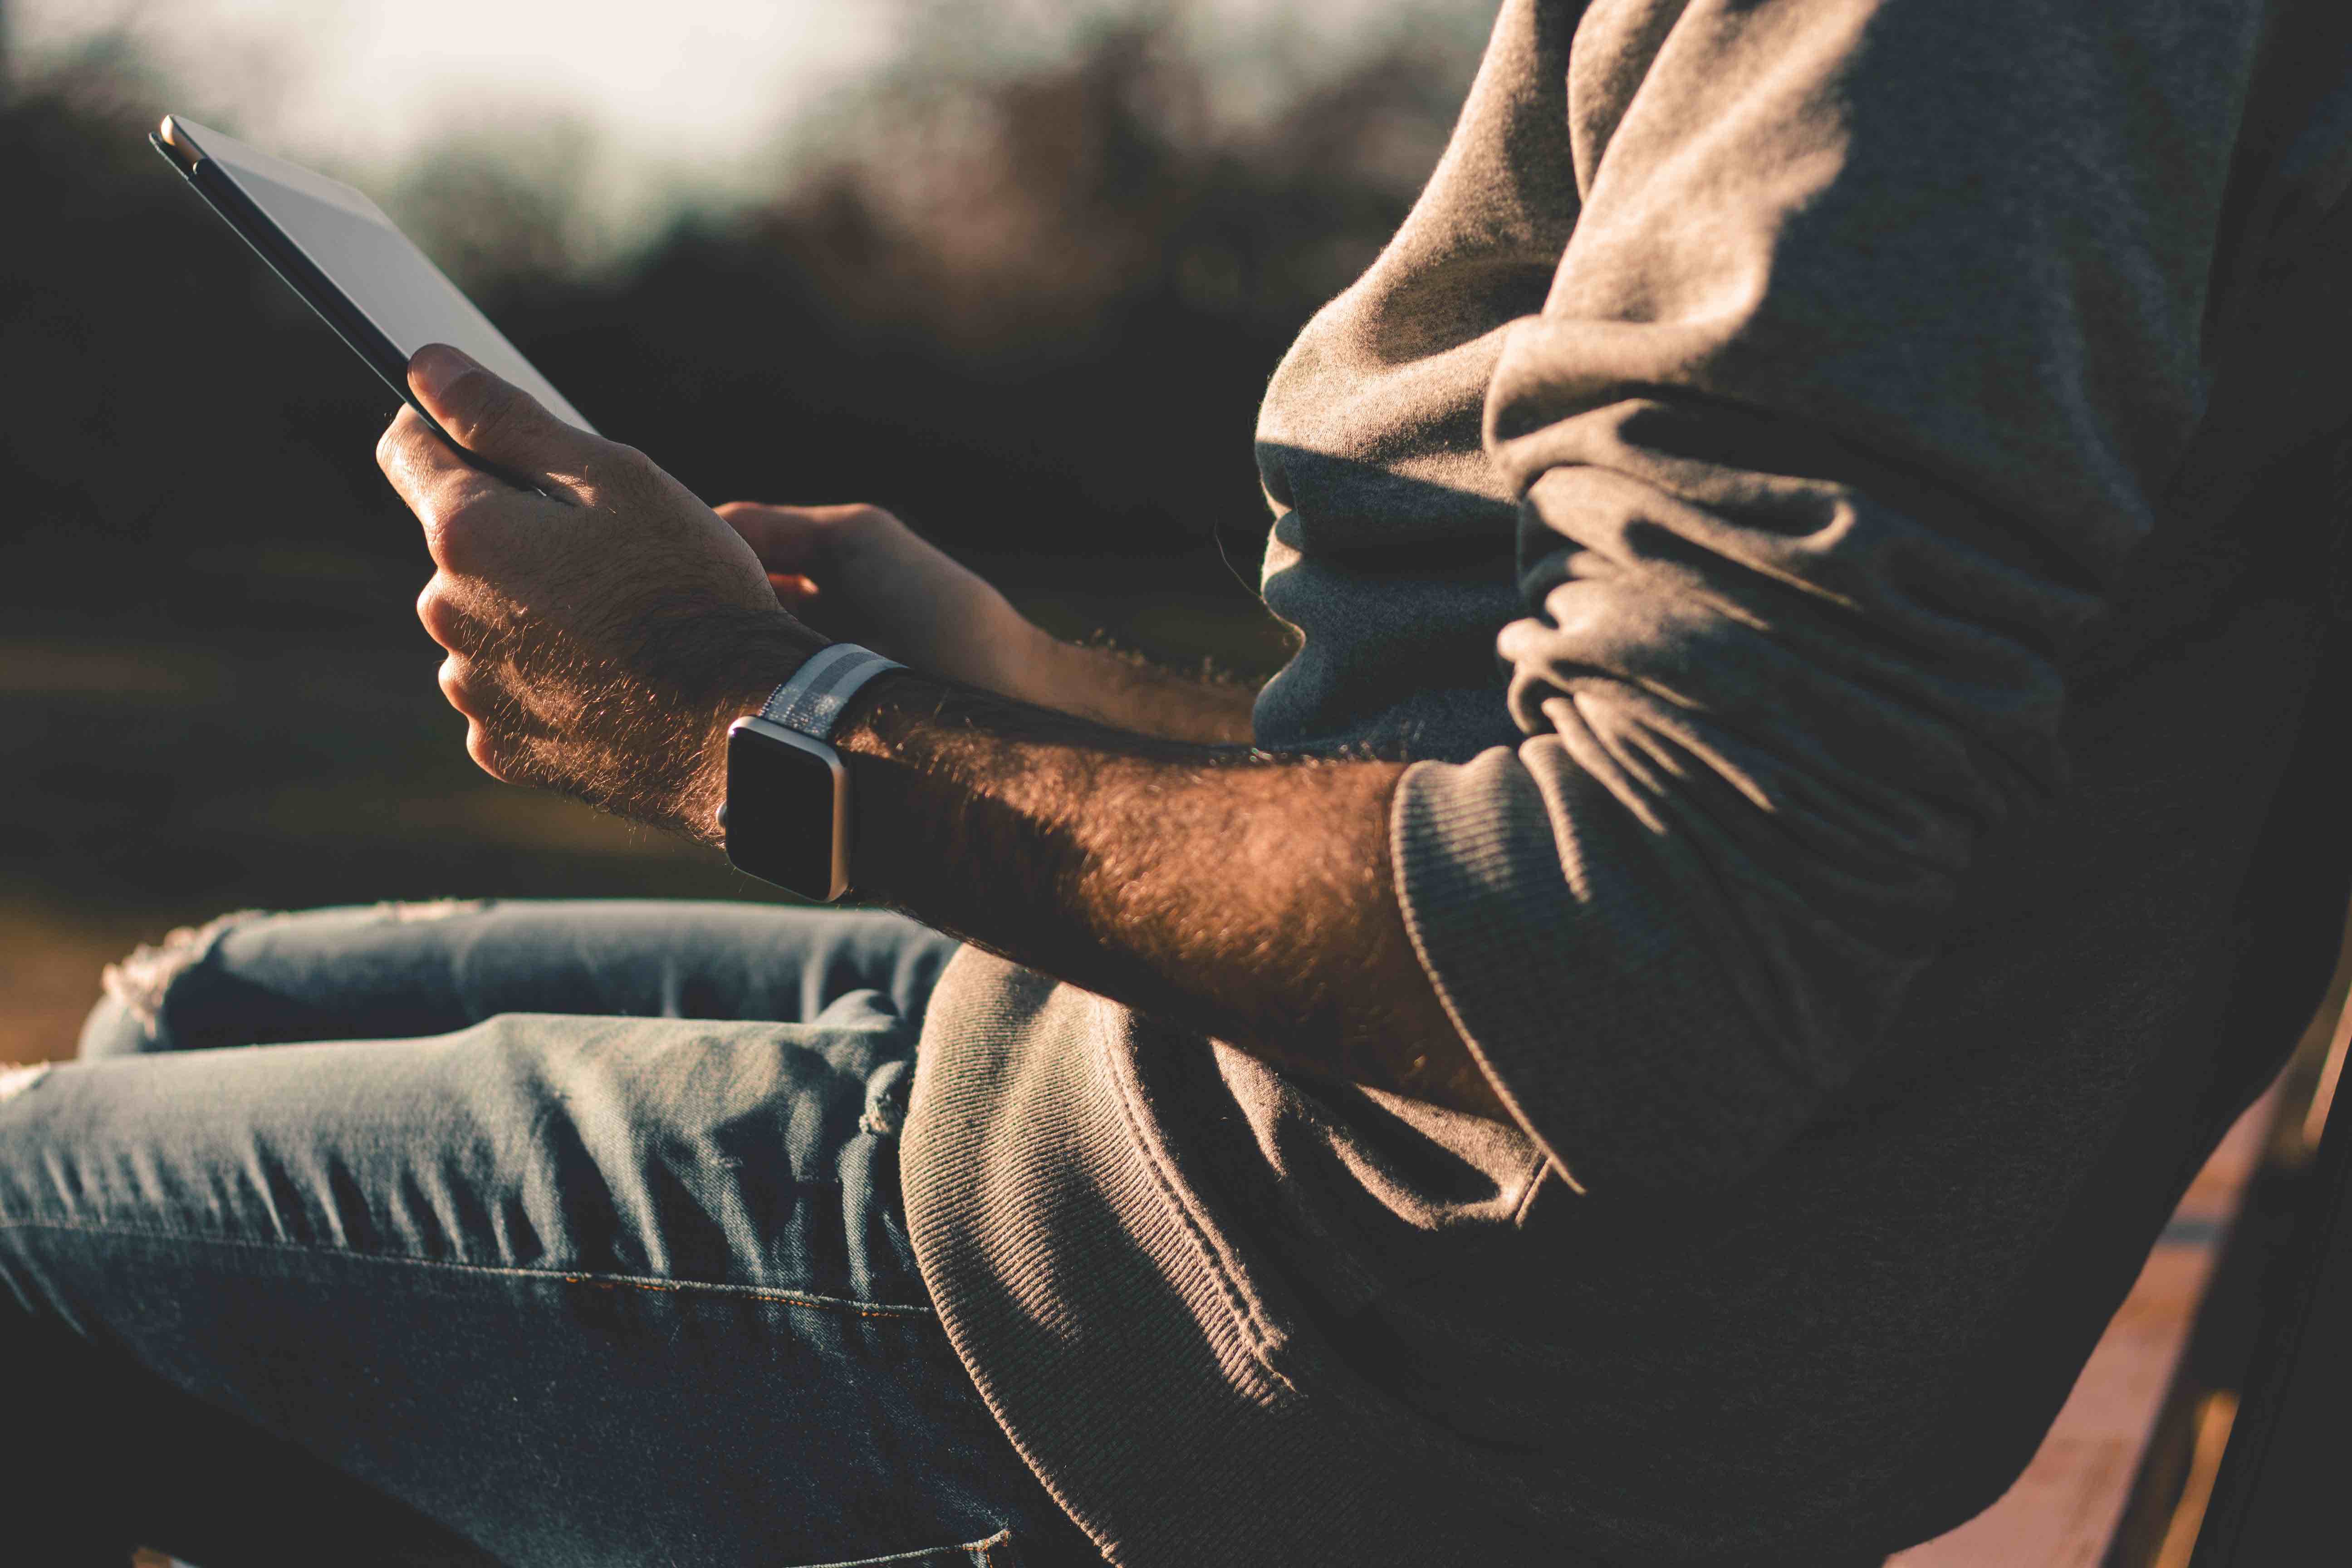 Now Read This: 6 Strategies to Reduce Your Screen Time During Social Distancing